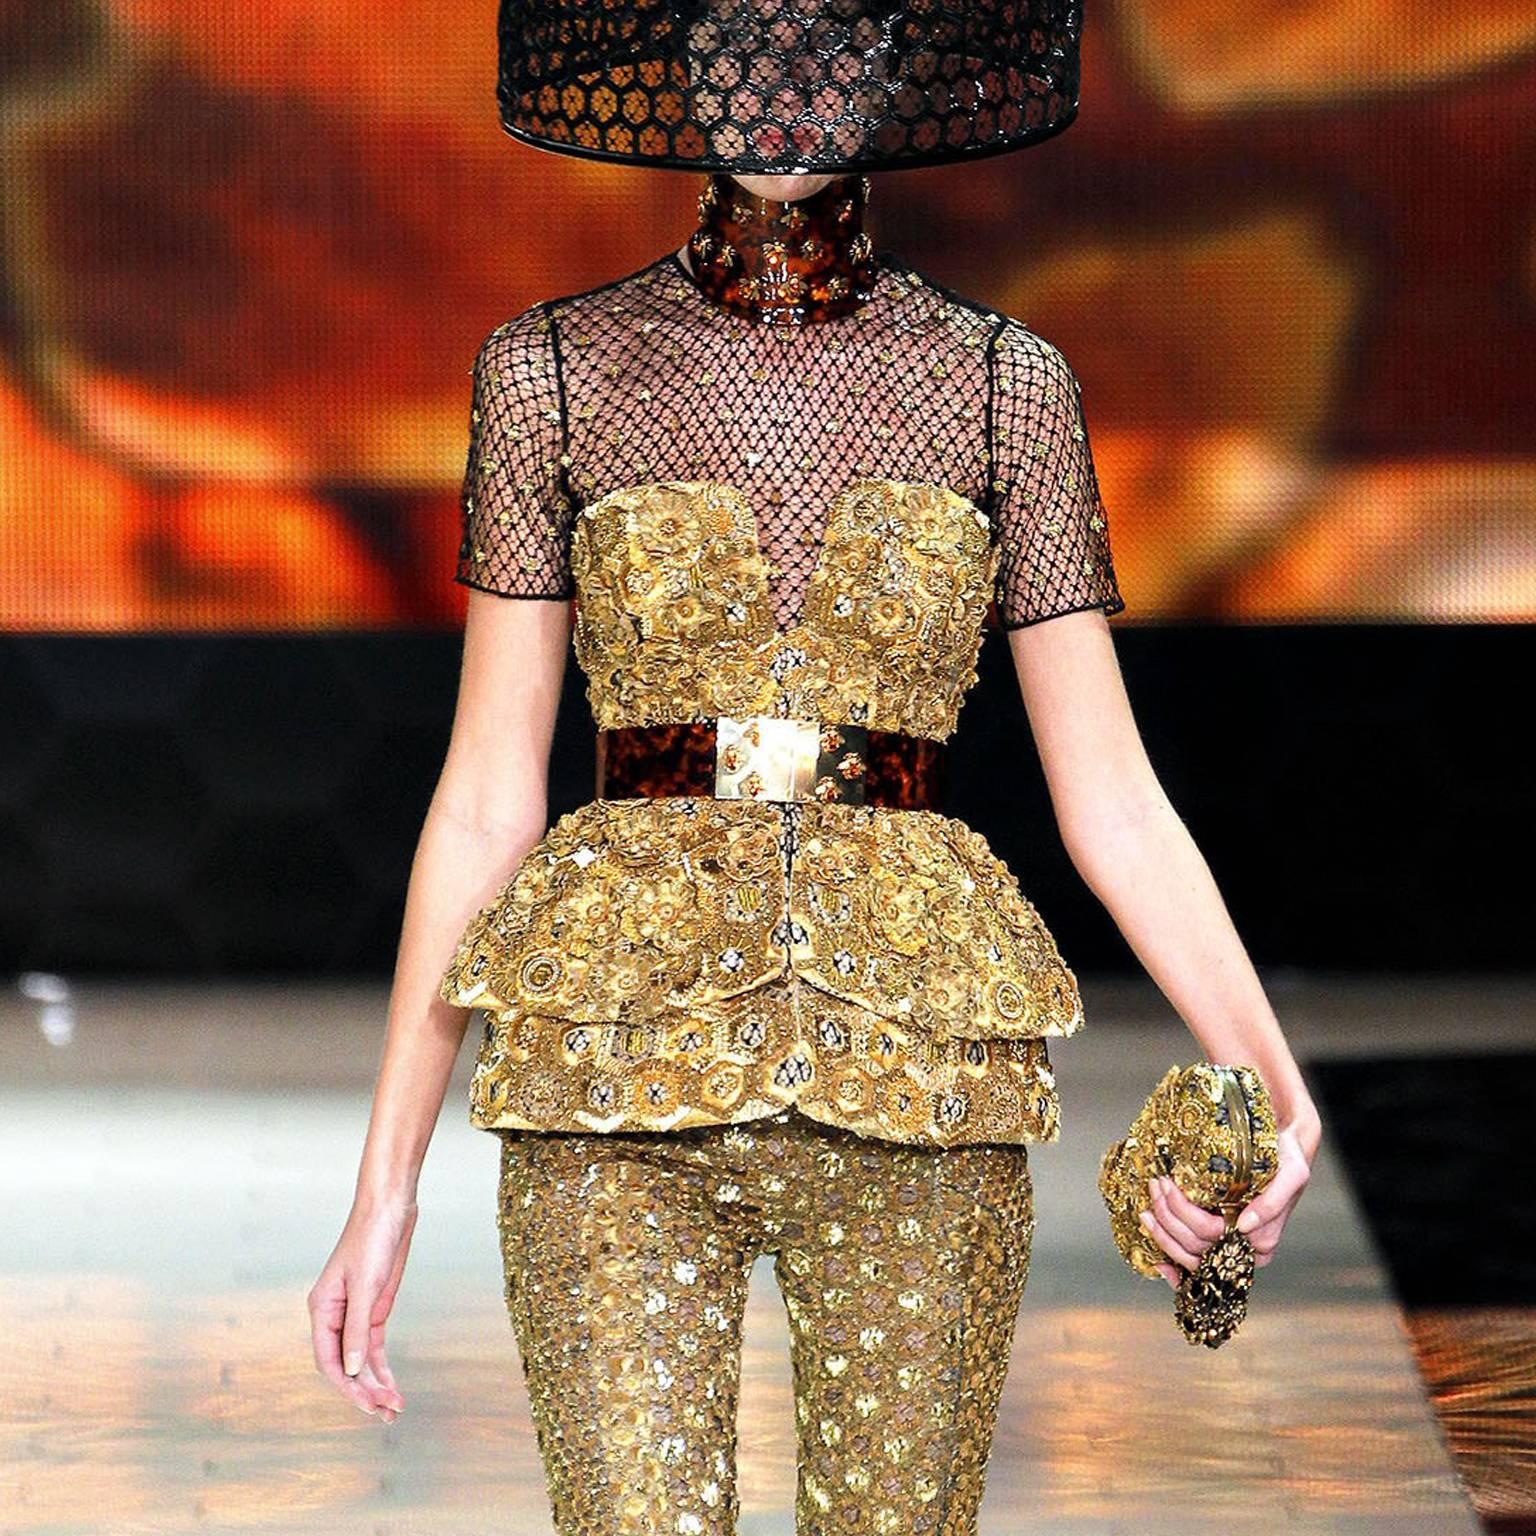 Alexander McQueen Tortoiseshell Perspex Belt with Gold Clasp and Bees S/S13 In Excellent Condition For Sale In London, GB